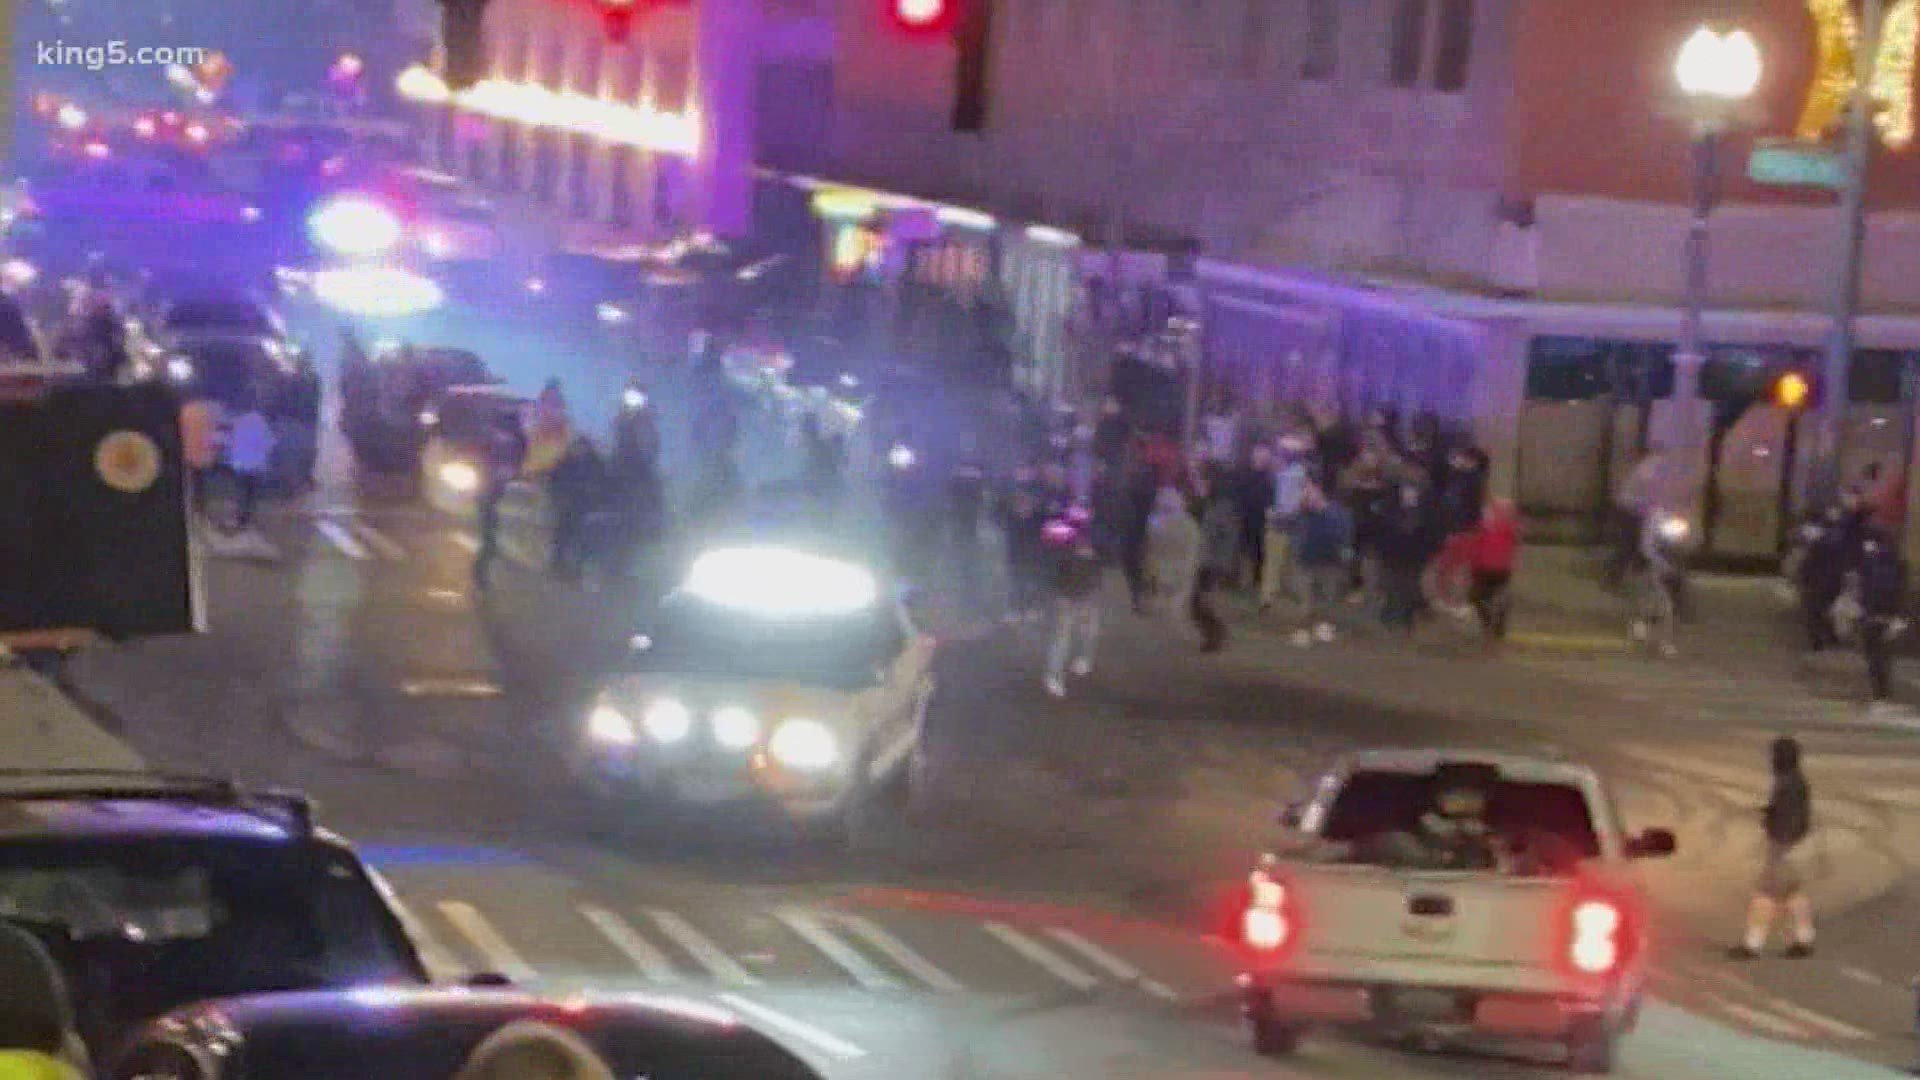 Tacoma officer who drove police car through crowd at street race has been identified | king5.com